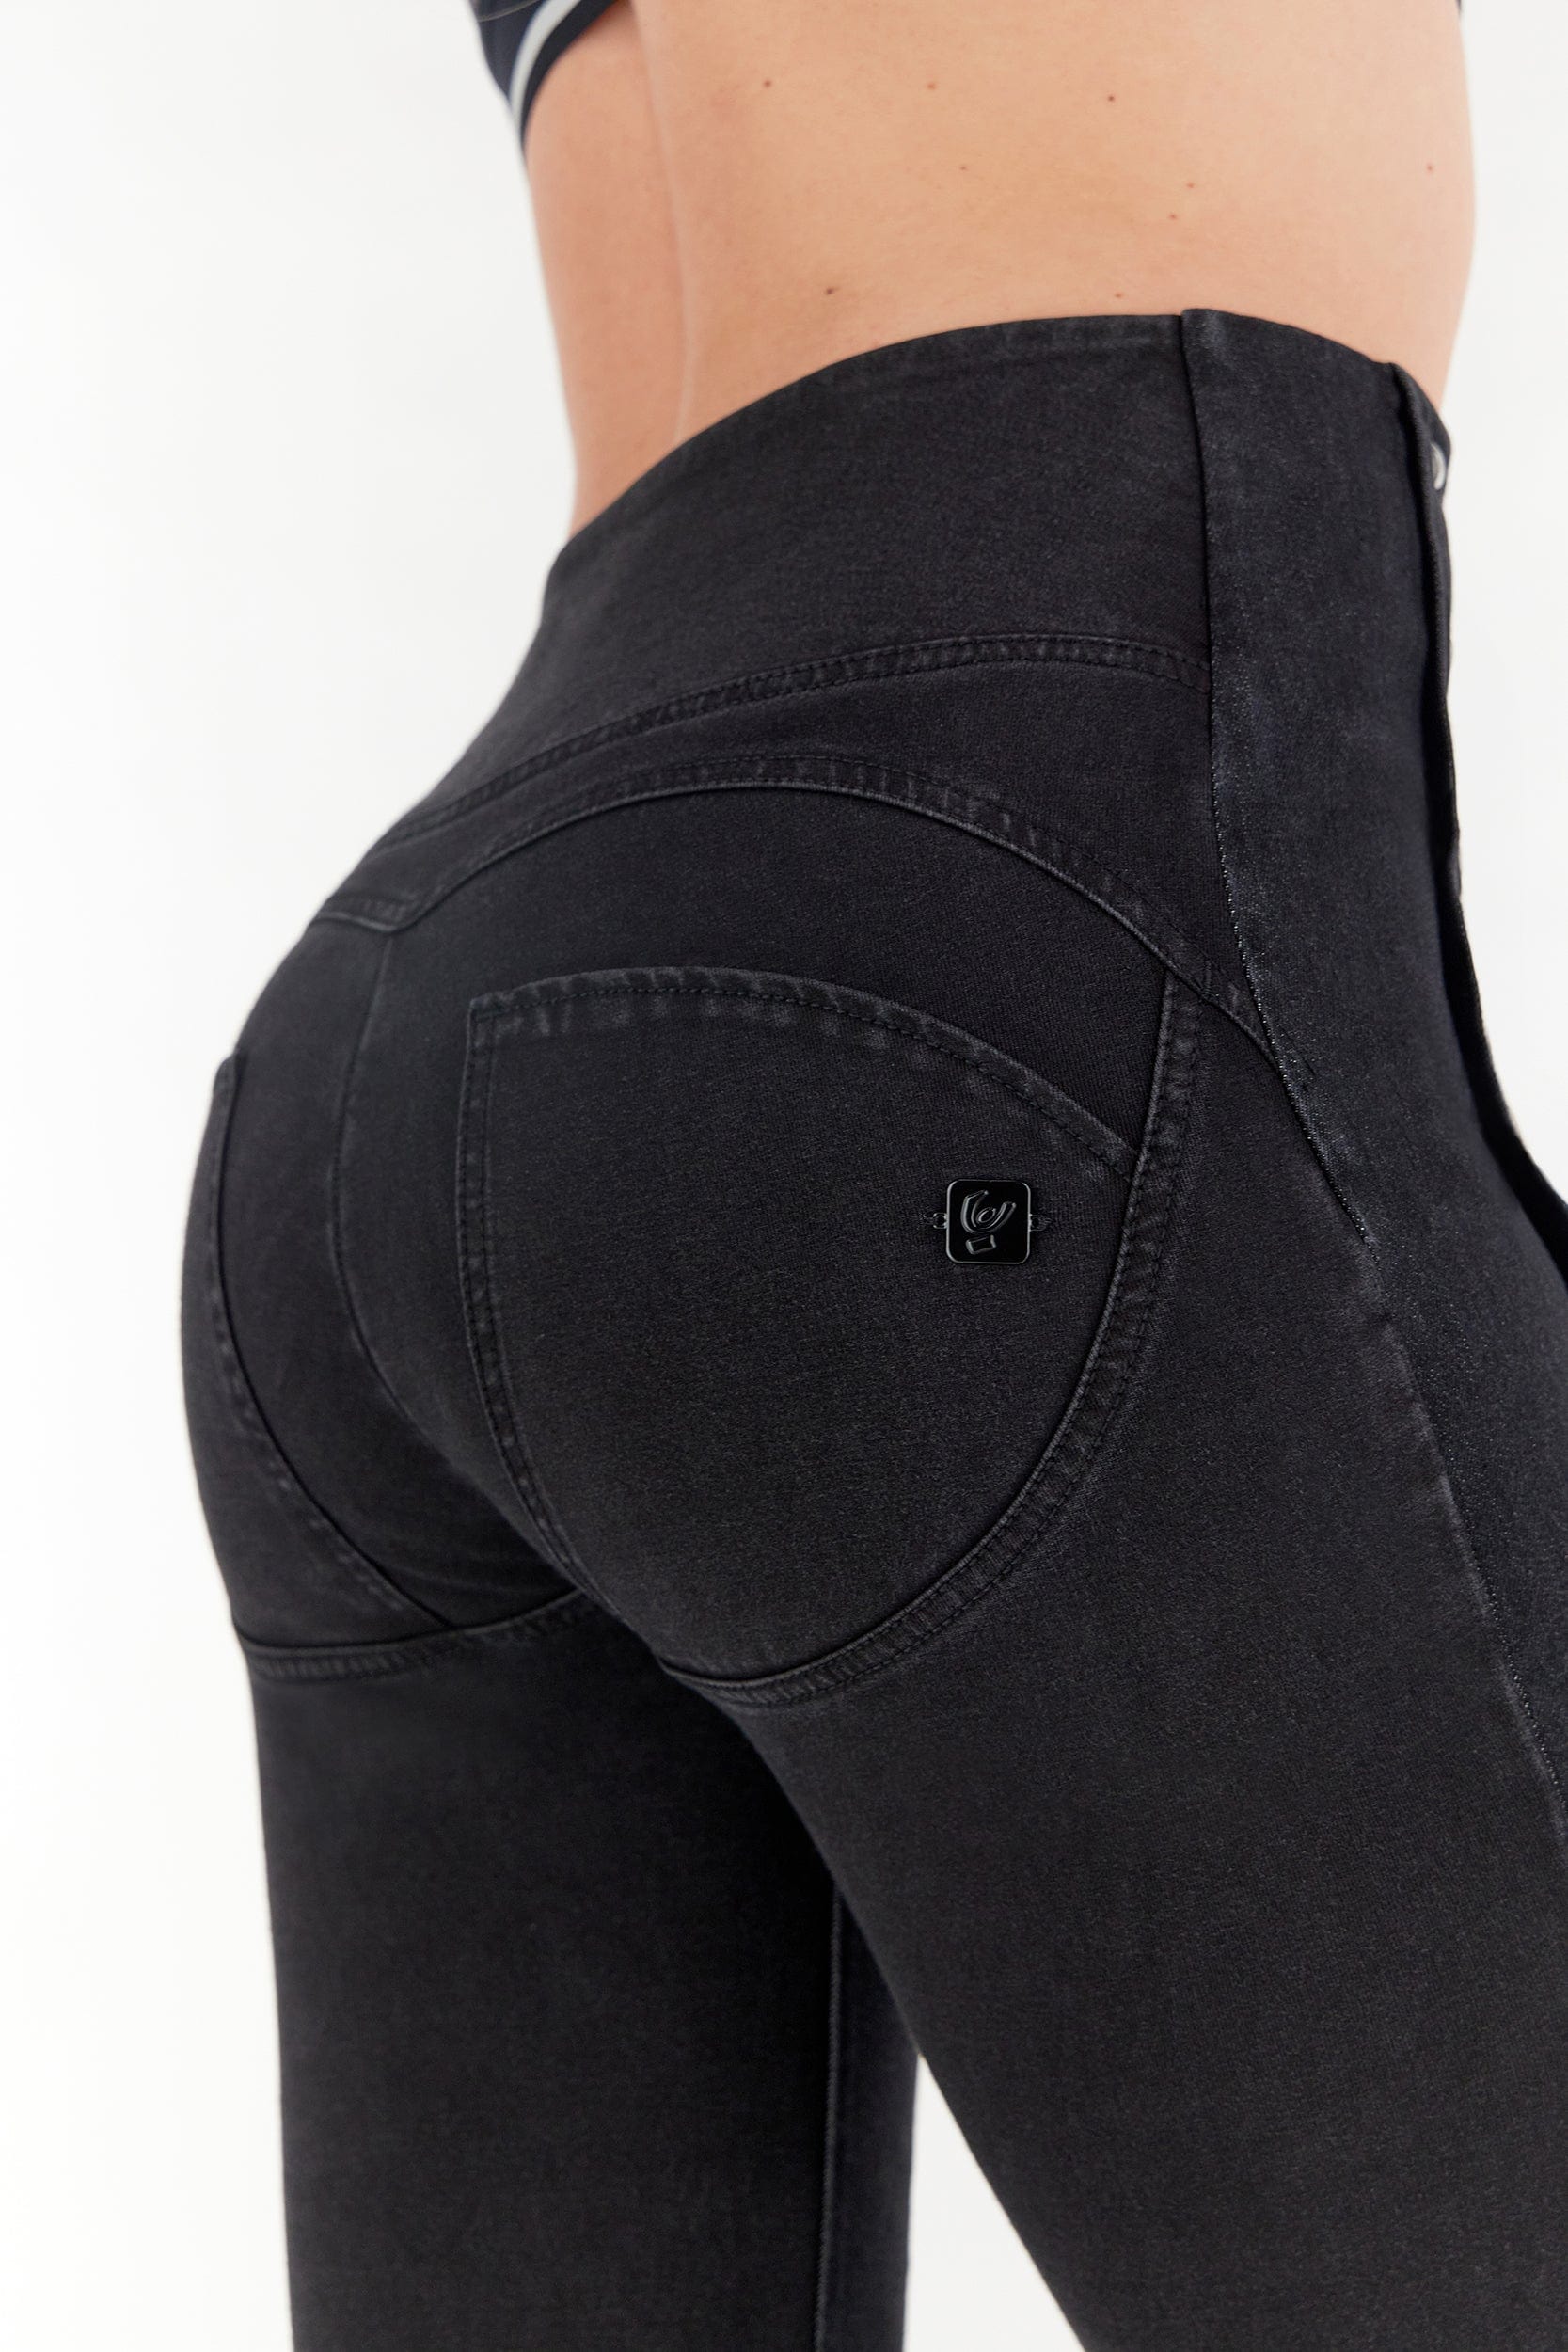 WR.UP® Denim with Studs - High Waisted - Full Length - Black + Black Stitching 5